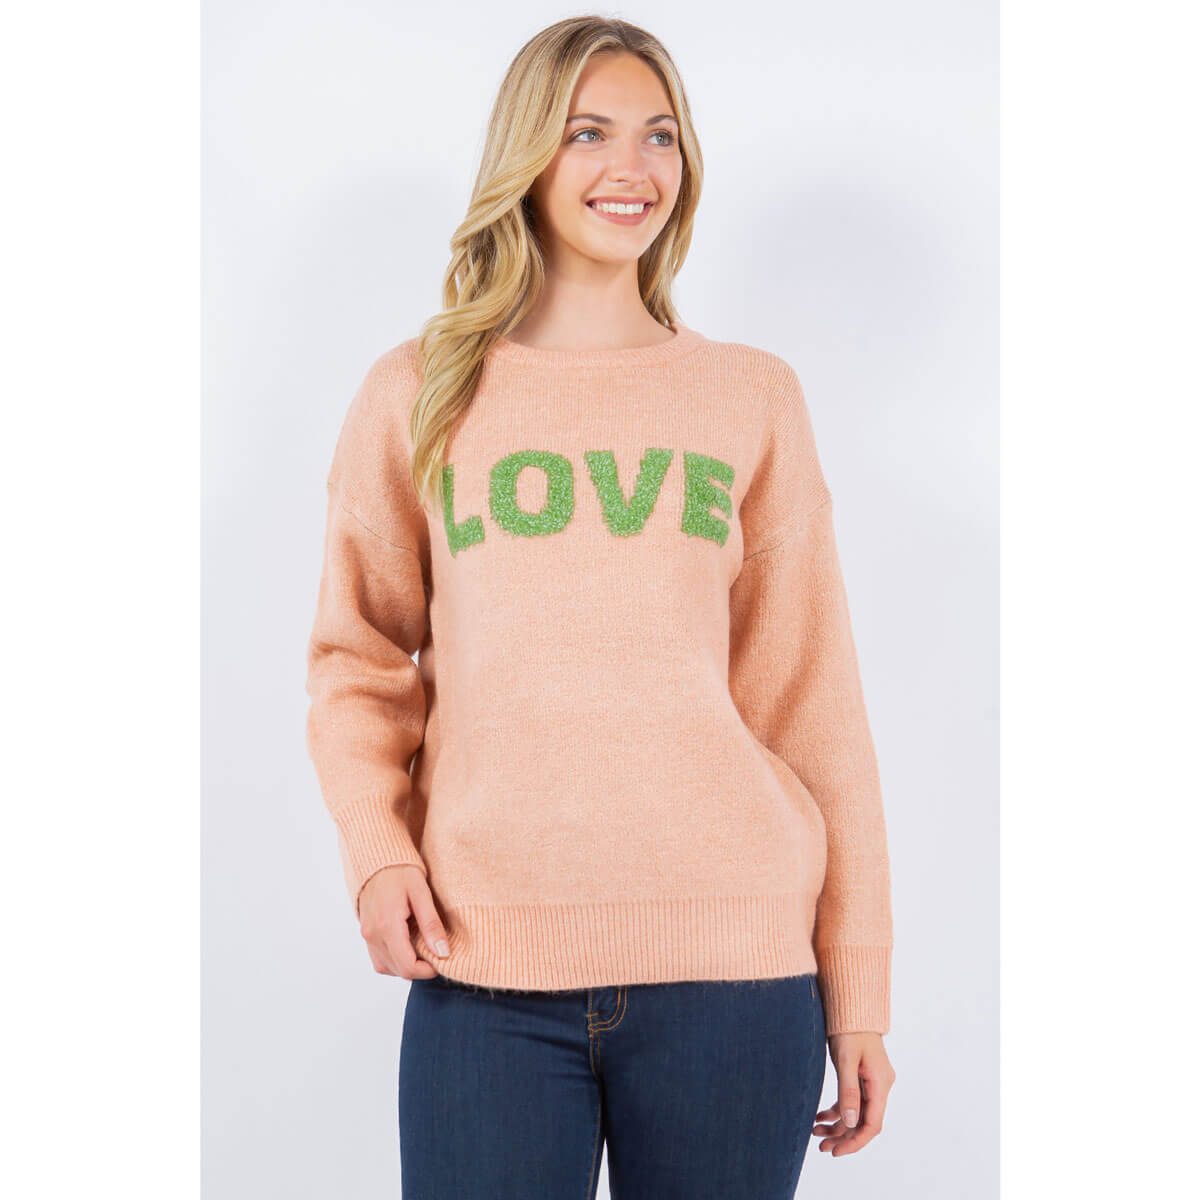 LOVE Knit Sweater pink front | MILK MONEY milkmoney.co | cute clothes for women. womens online clothing. trendy online clothing stores. womens casual clothing online. trendy clothes online. trendy women's clothing online. ladies online clothing stores. trendy women's clothing stores. cute female clothes.